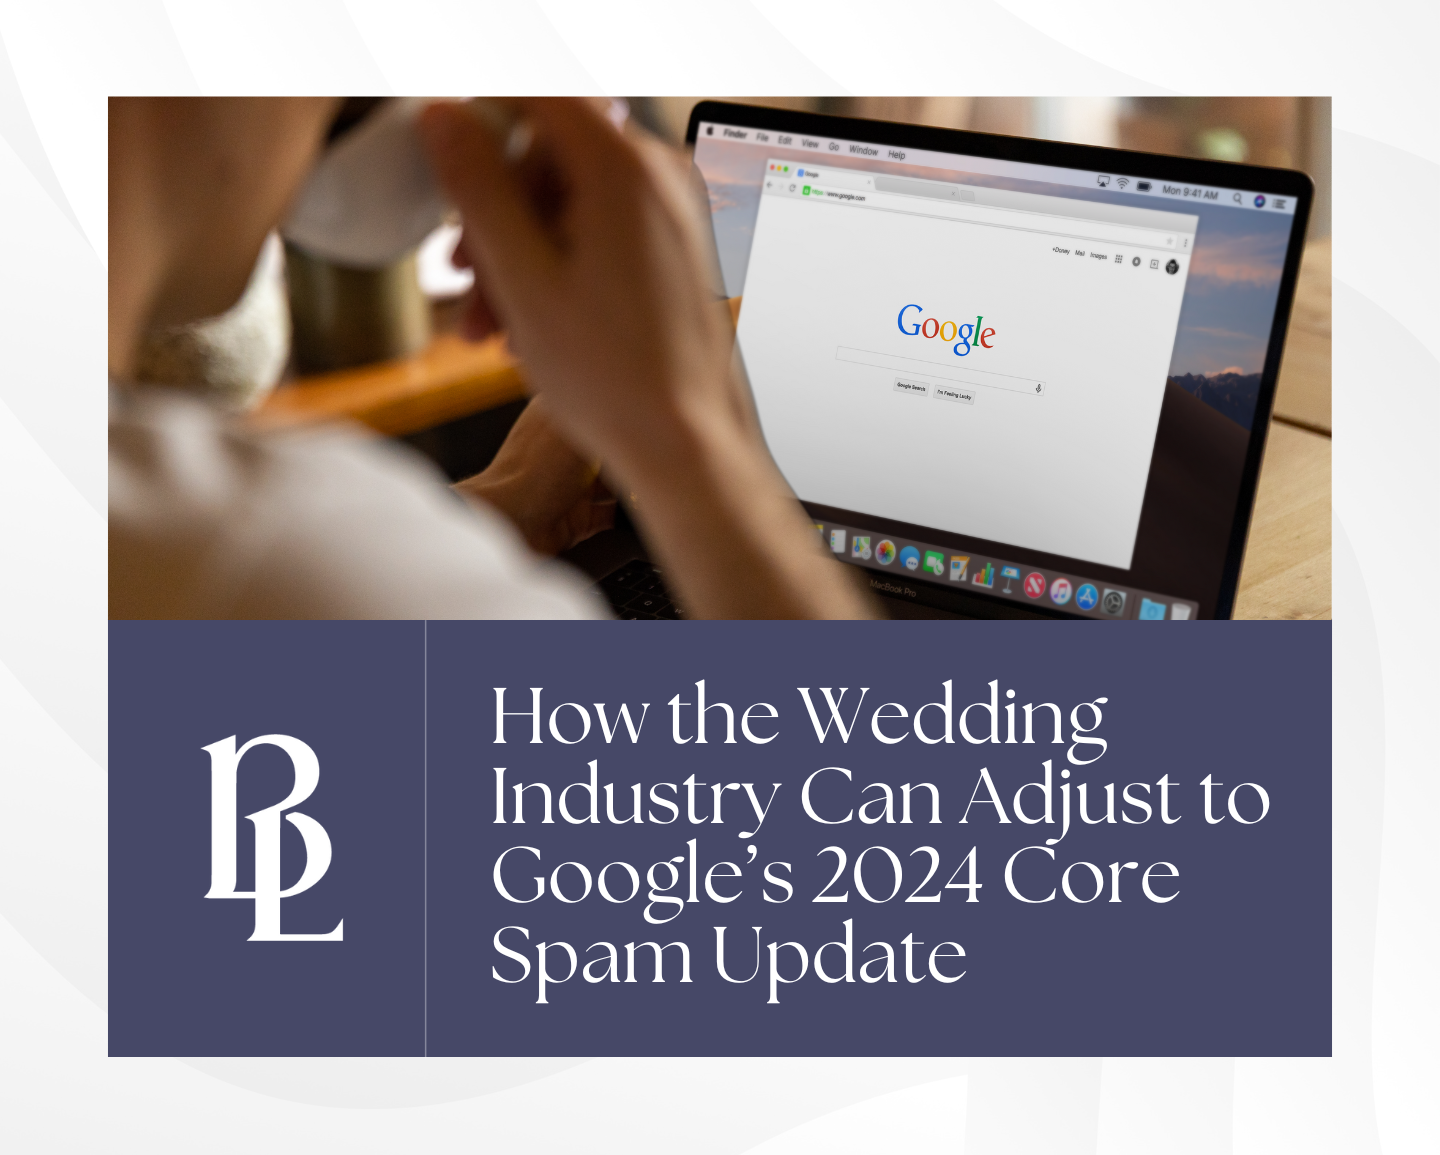 Person viewing a Google search page on a laptop with an article about the wedding industry's adjustment to Google's 2024 core spam update and ADA compliance on the screen.